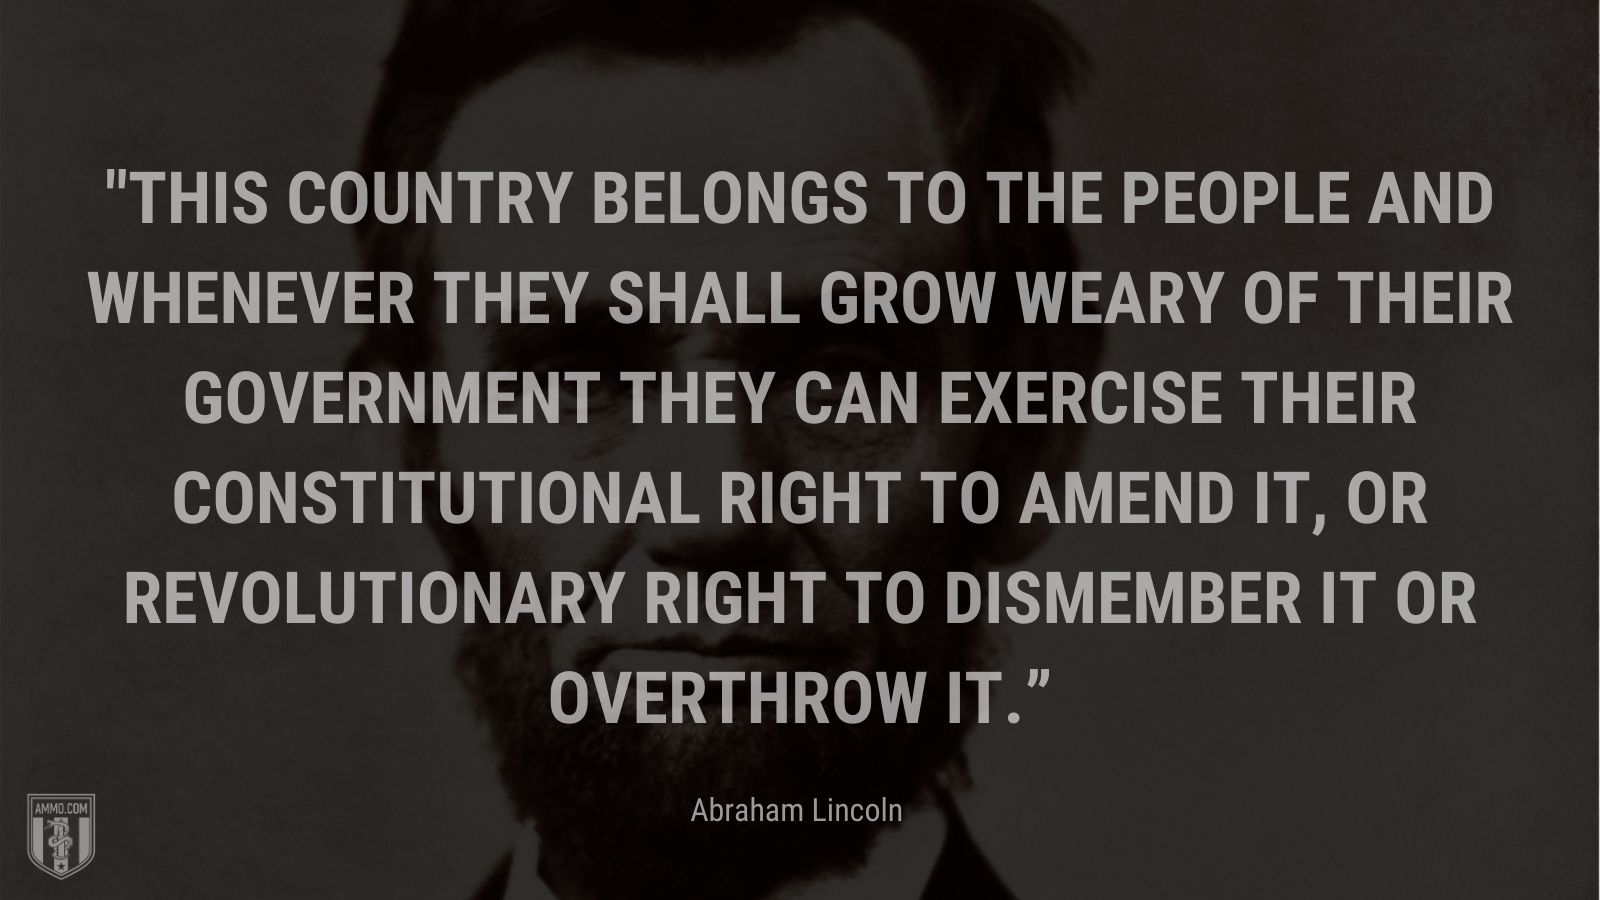 “This country belongs to the people and whenever they shall grow weary of their government they can exercise their constitutional right to amend it, or revolutionary right to dismember it or overthrow it.” - Abraham Lincoln